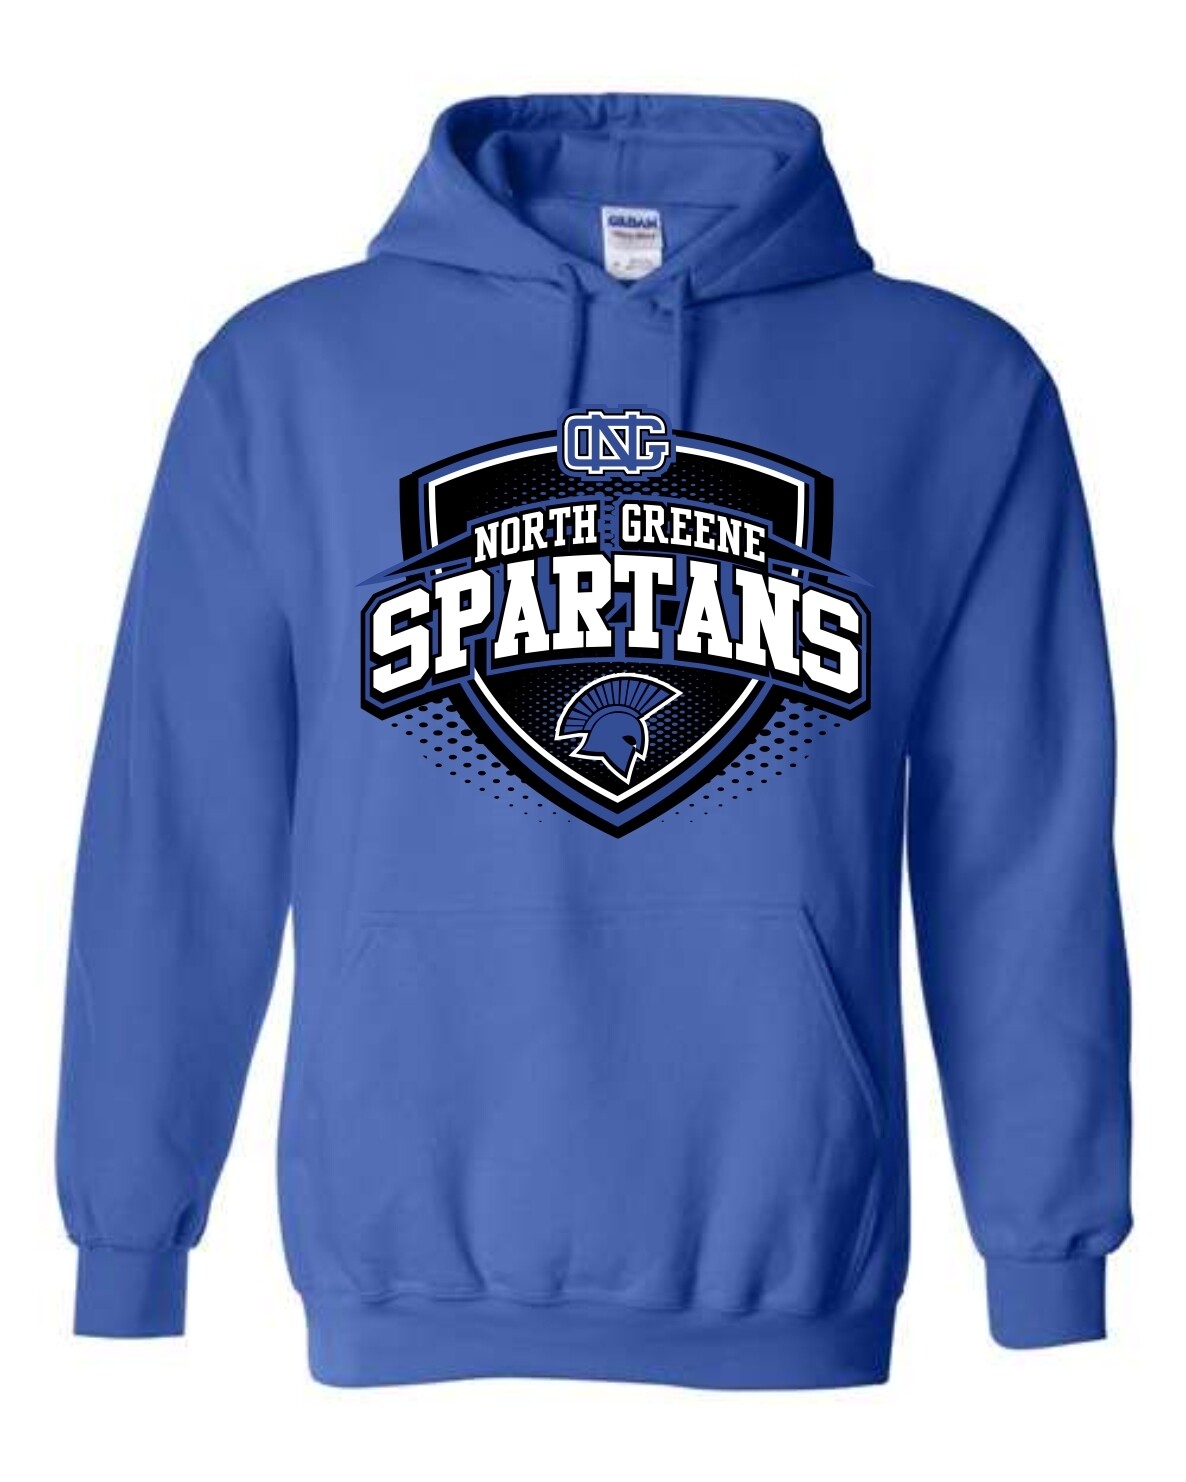 NG SPARTANS-18500 (PULLOVER HOODIE)